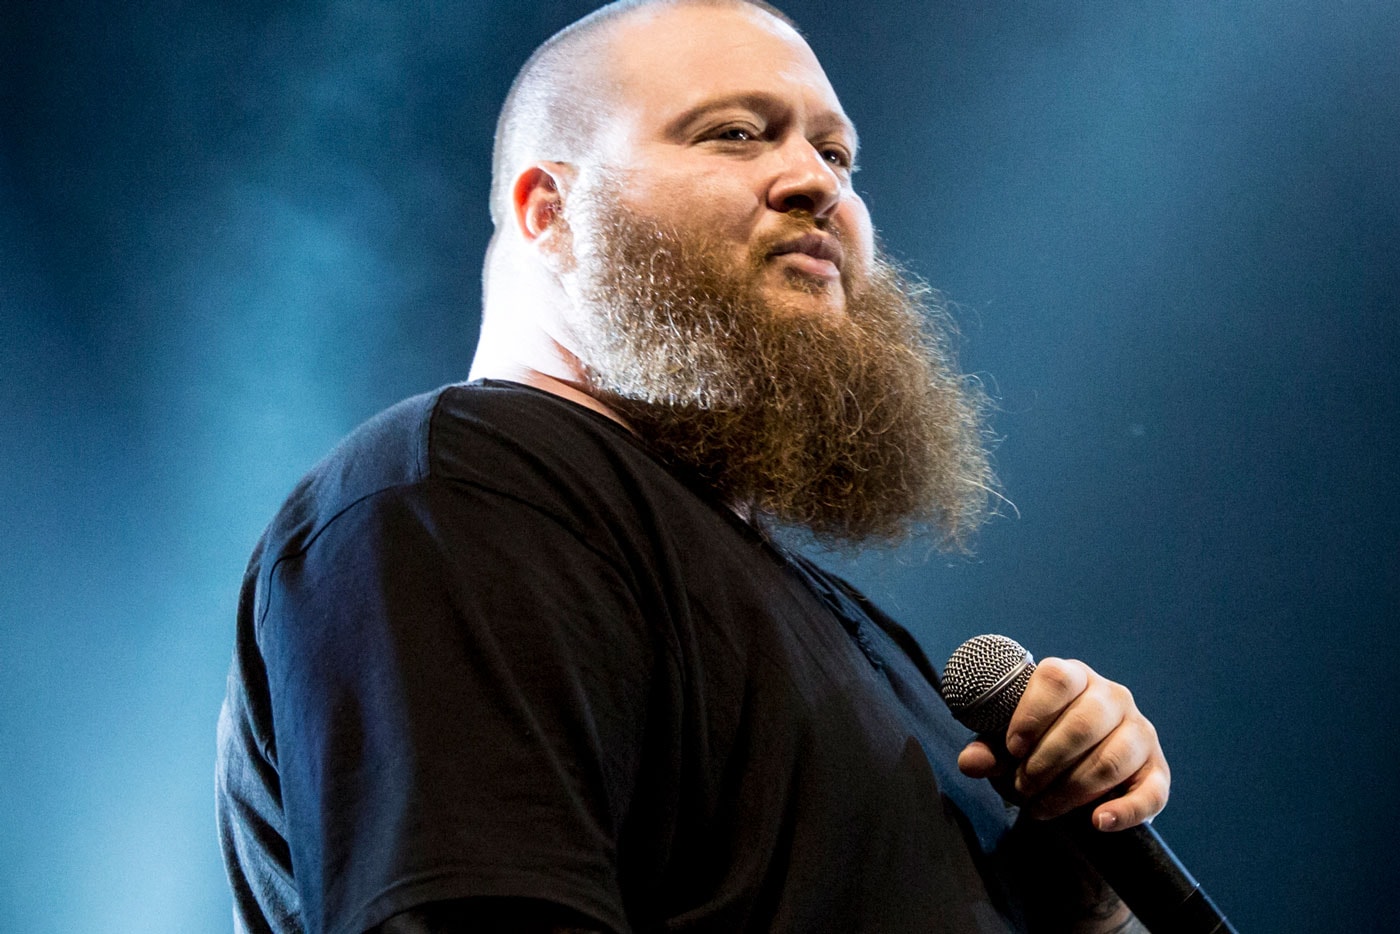 Watch Action Bronson Take Over Australia in New Episode of "F*ck That's Delicious"